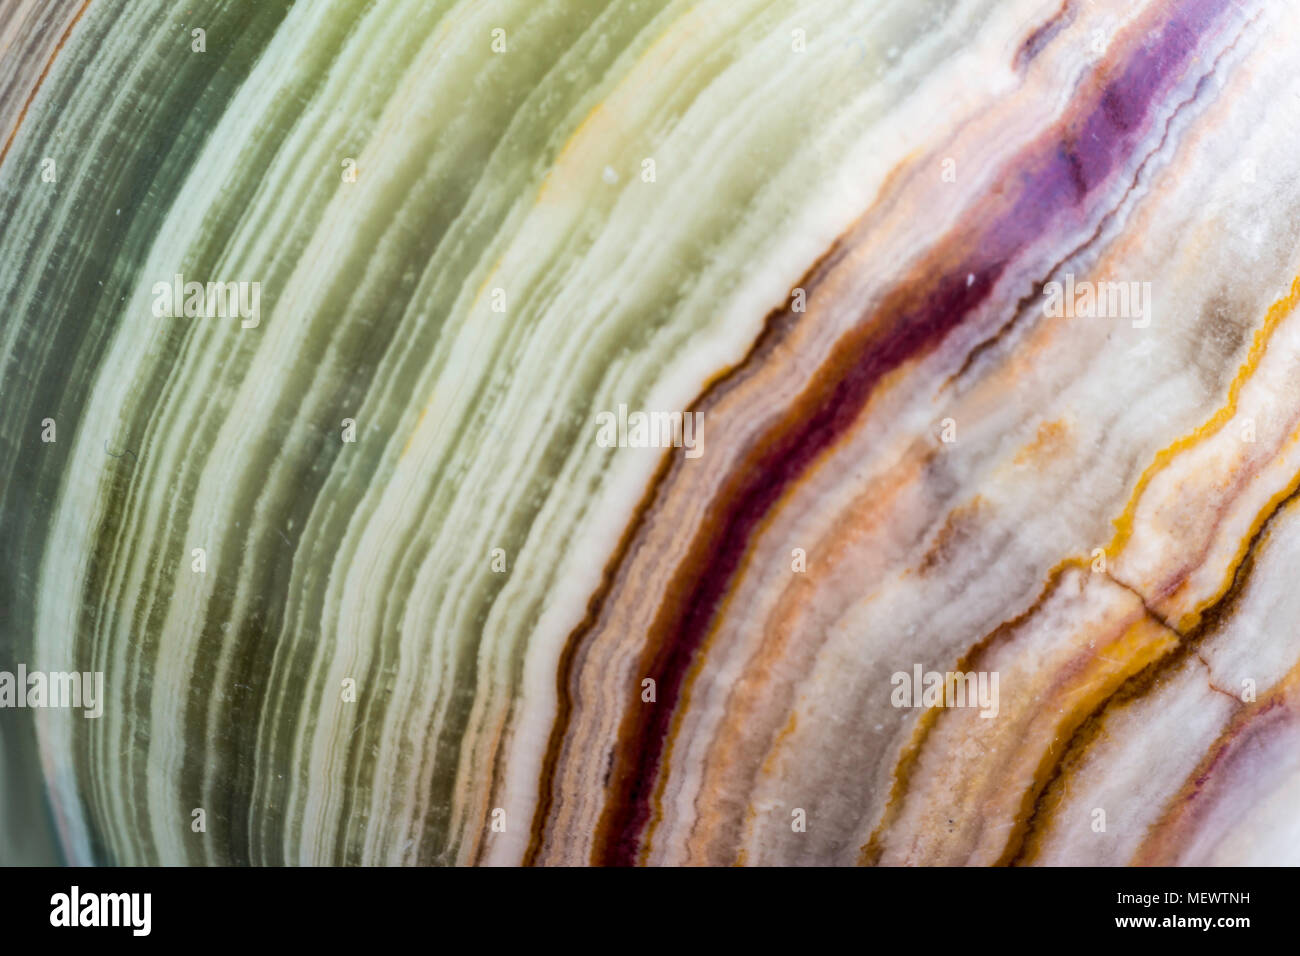 Macro photo texture of polished onyx stone. Photo for the site about geology, stones, jewelry, handwork, textures, art. Stock Photo